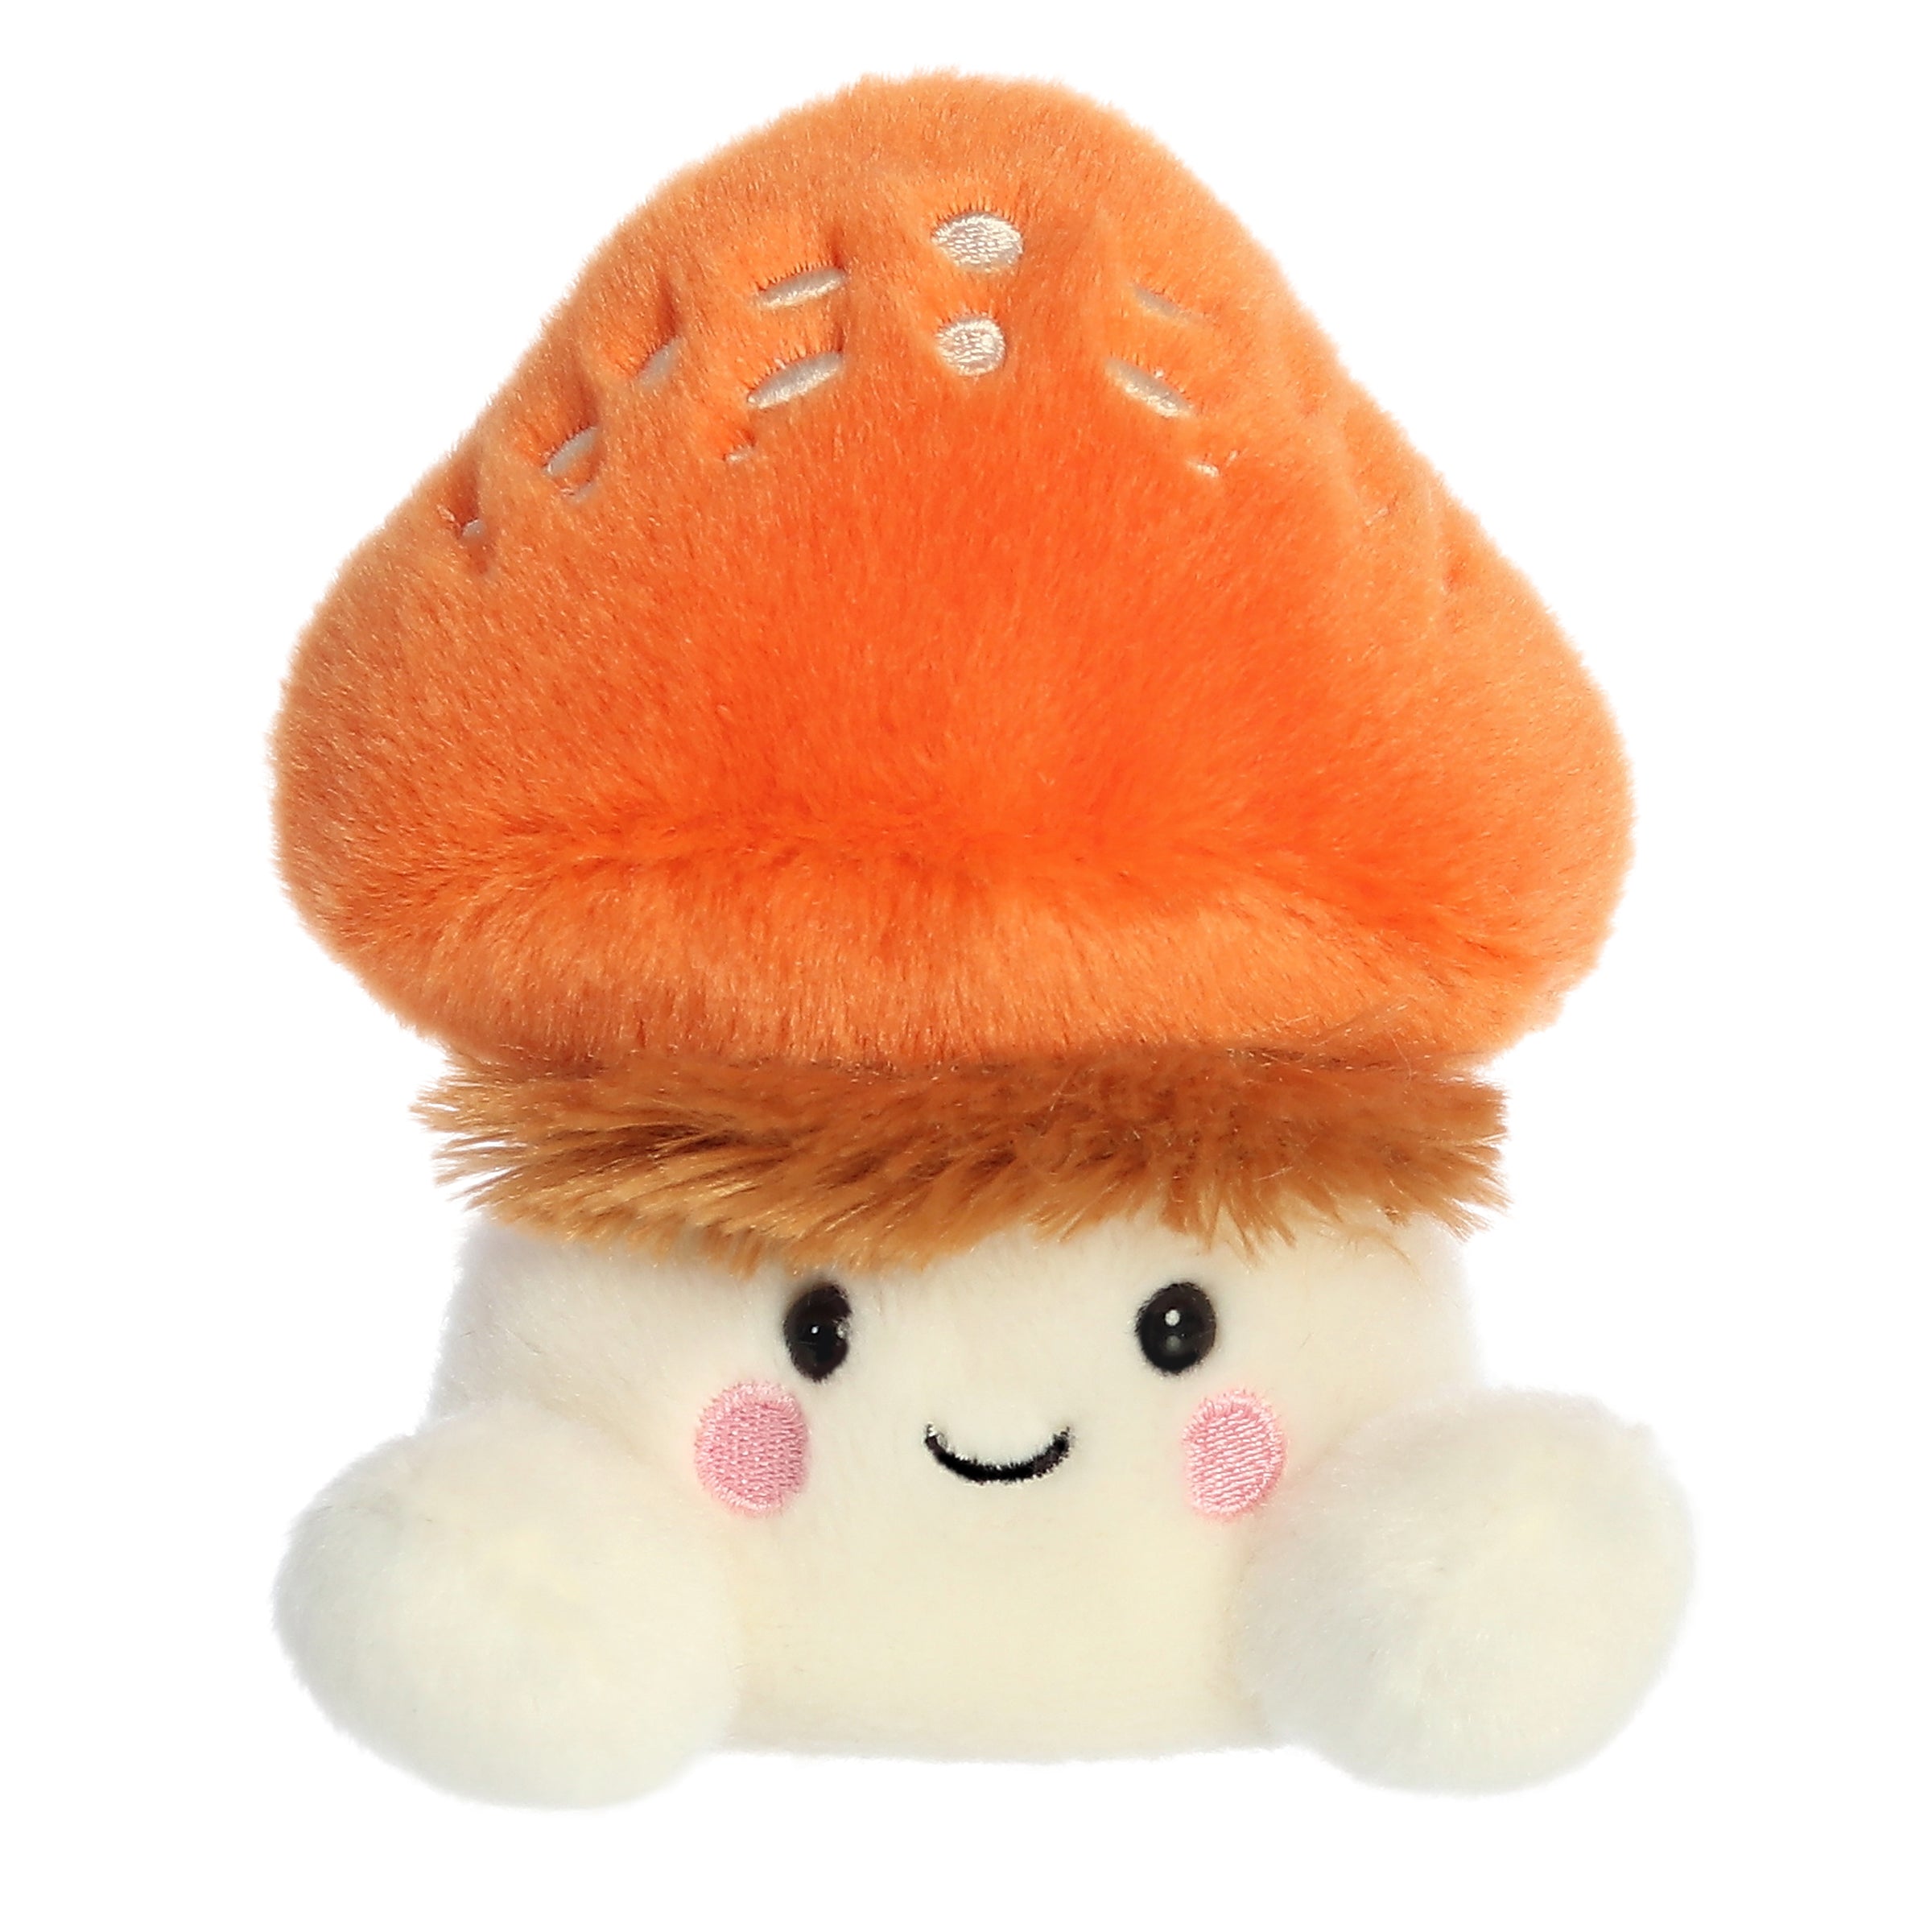 Fabian Fluffy Mushroom plush from Palm Pals, with a speckled orange cap and an adorable mushroom plush body!